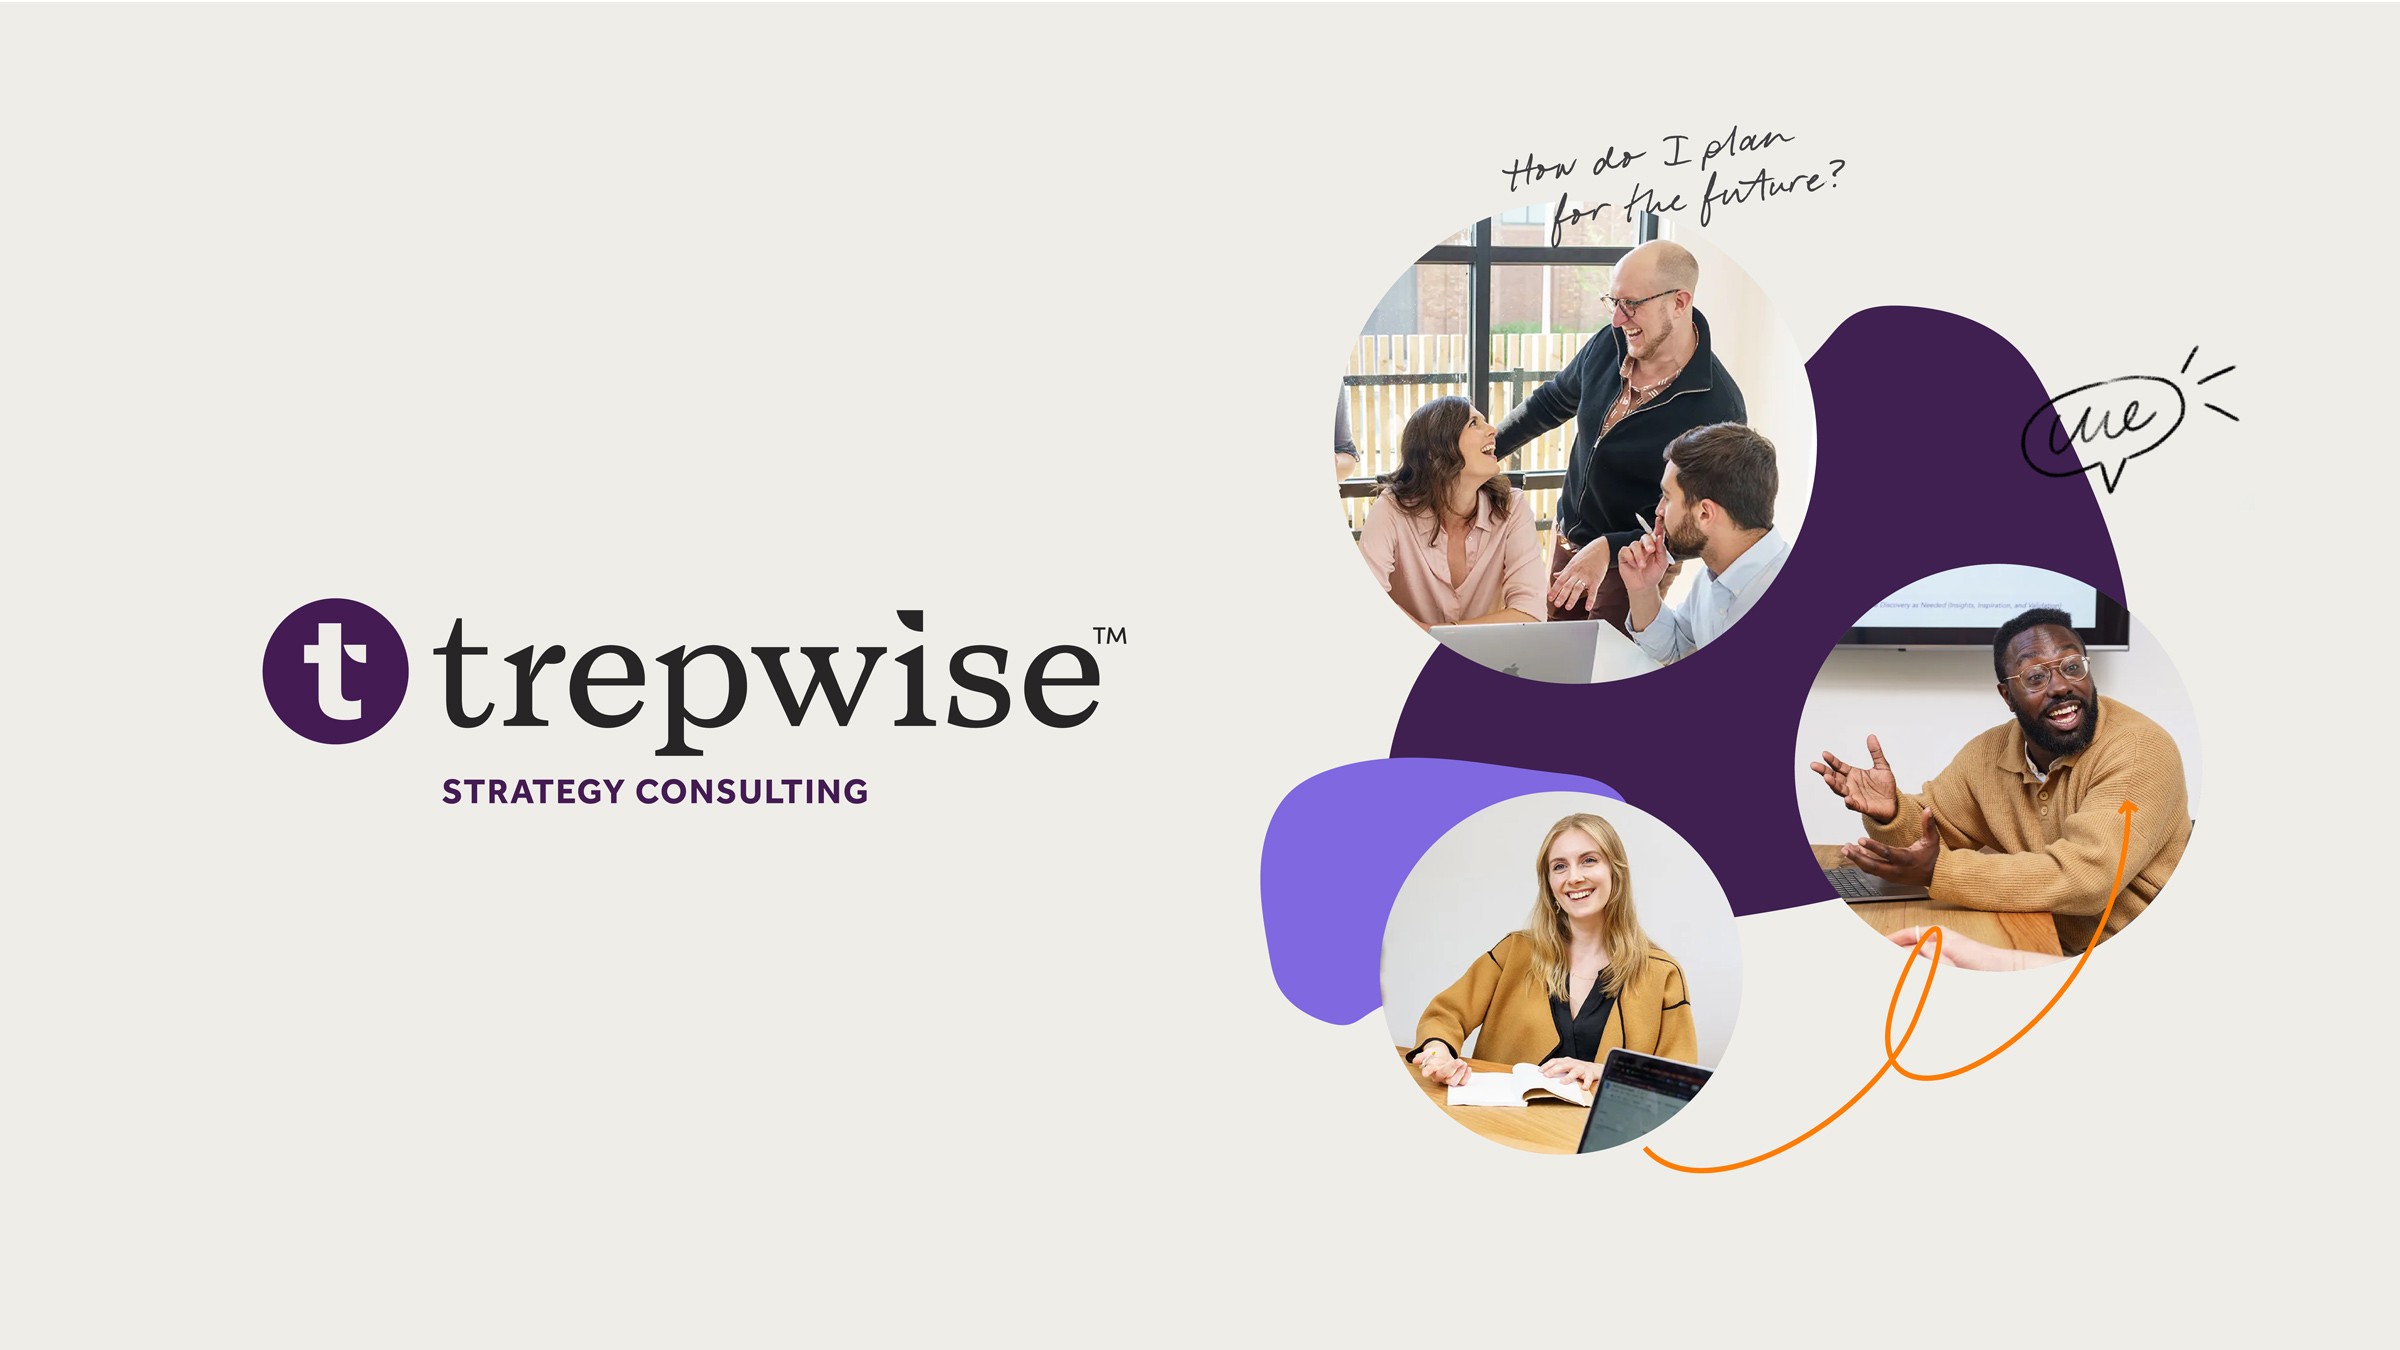 The new branding for Trepwise, a strategic consulting firm